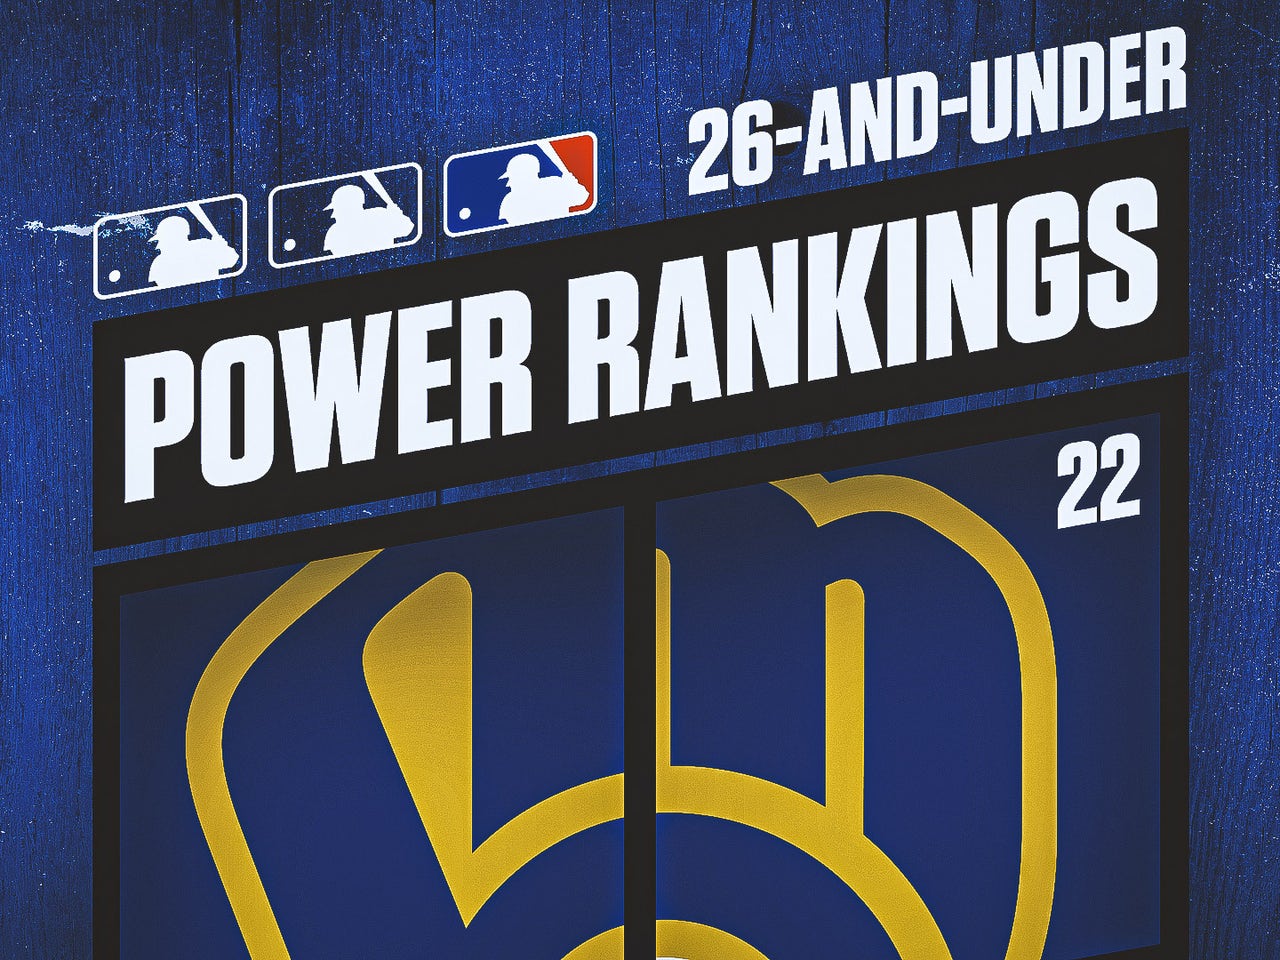 Milwaukee Brewers: is NL Central success on the horizon in 2023?